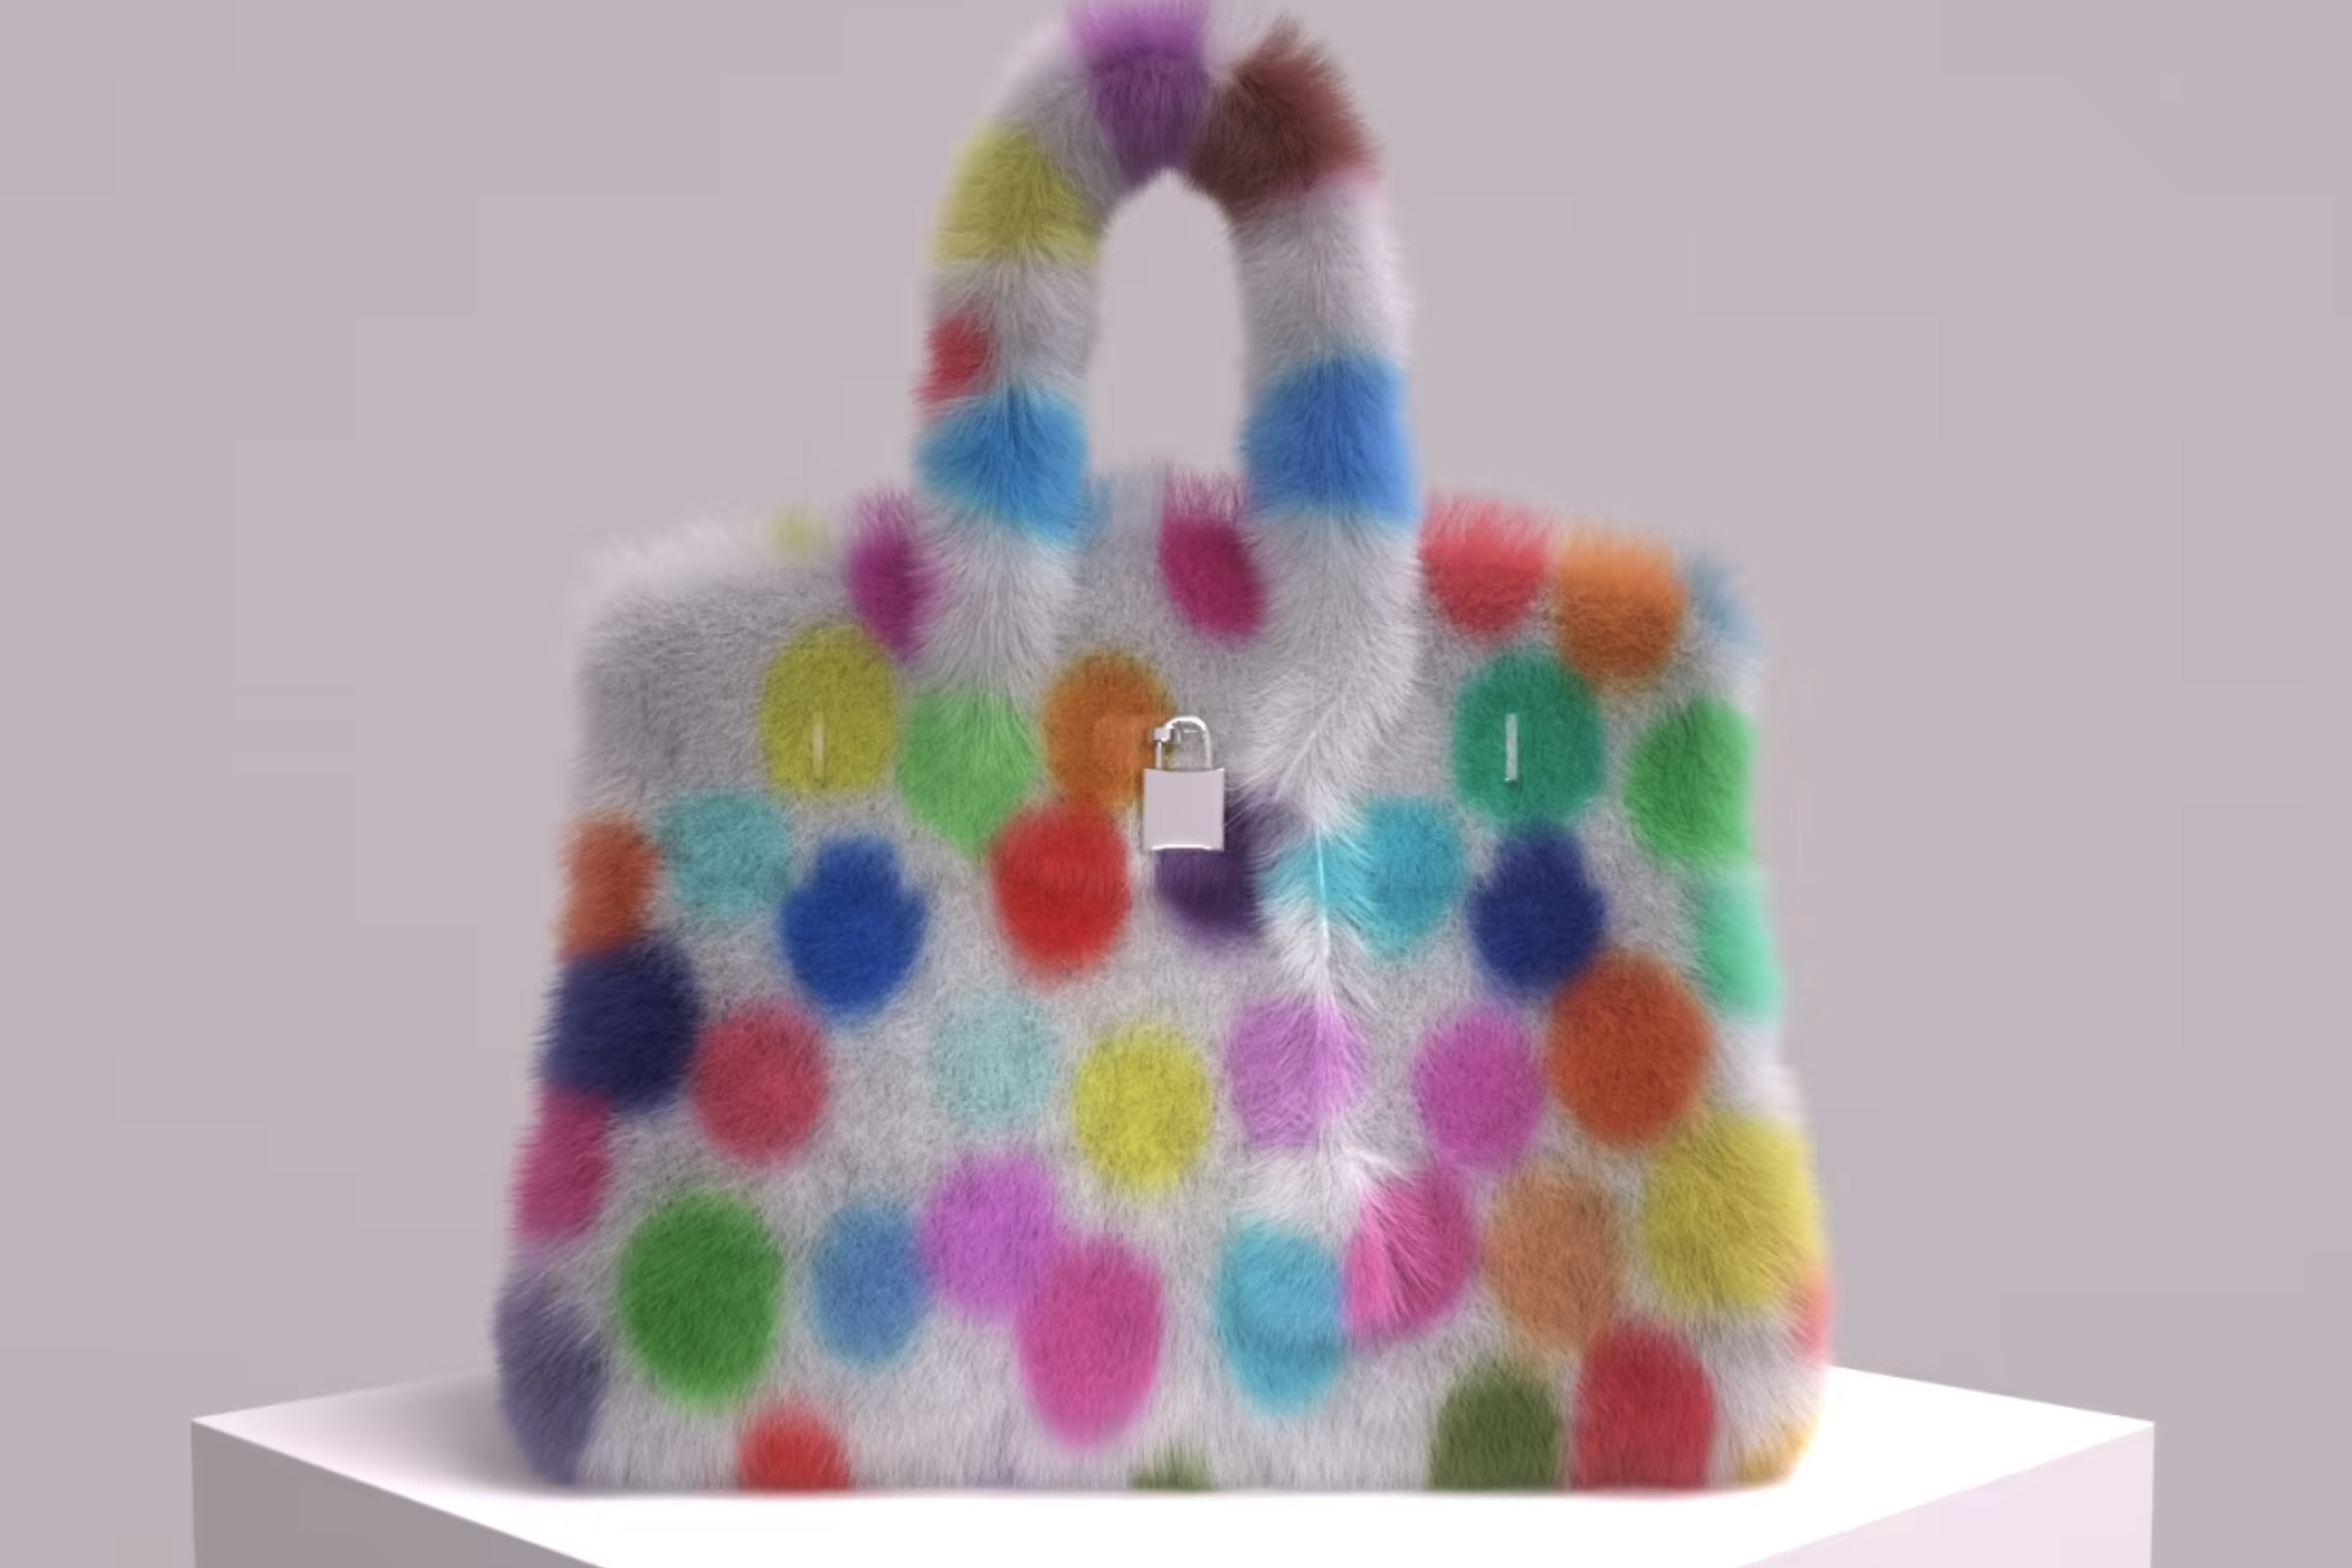 A picture of a faux-fur Birkin handbag with polka dots.